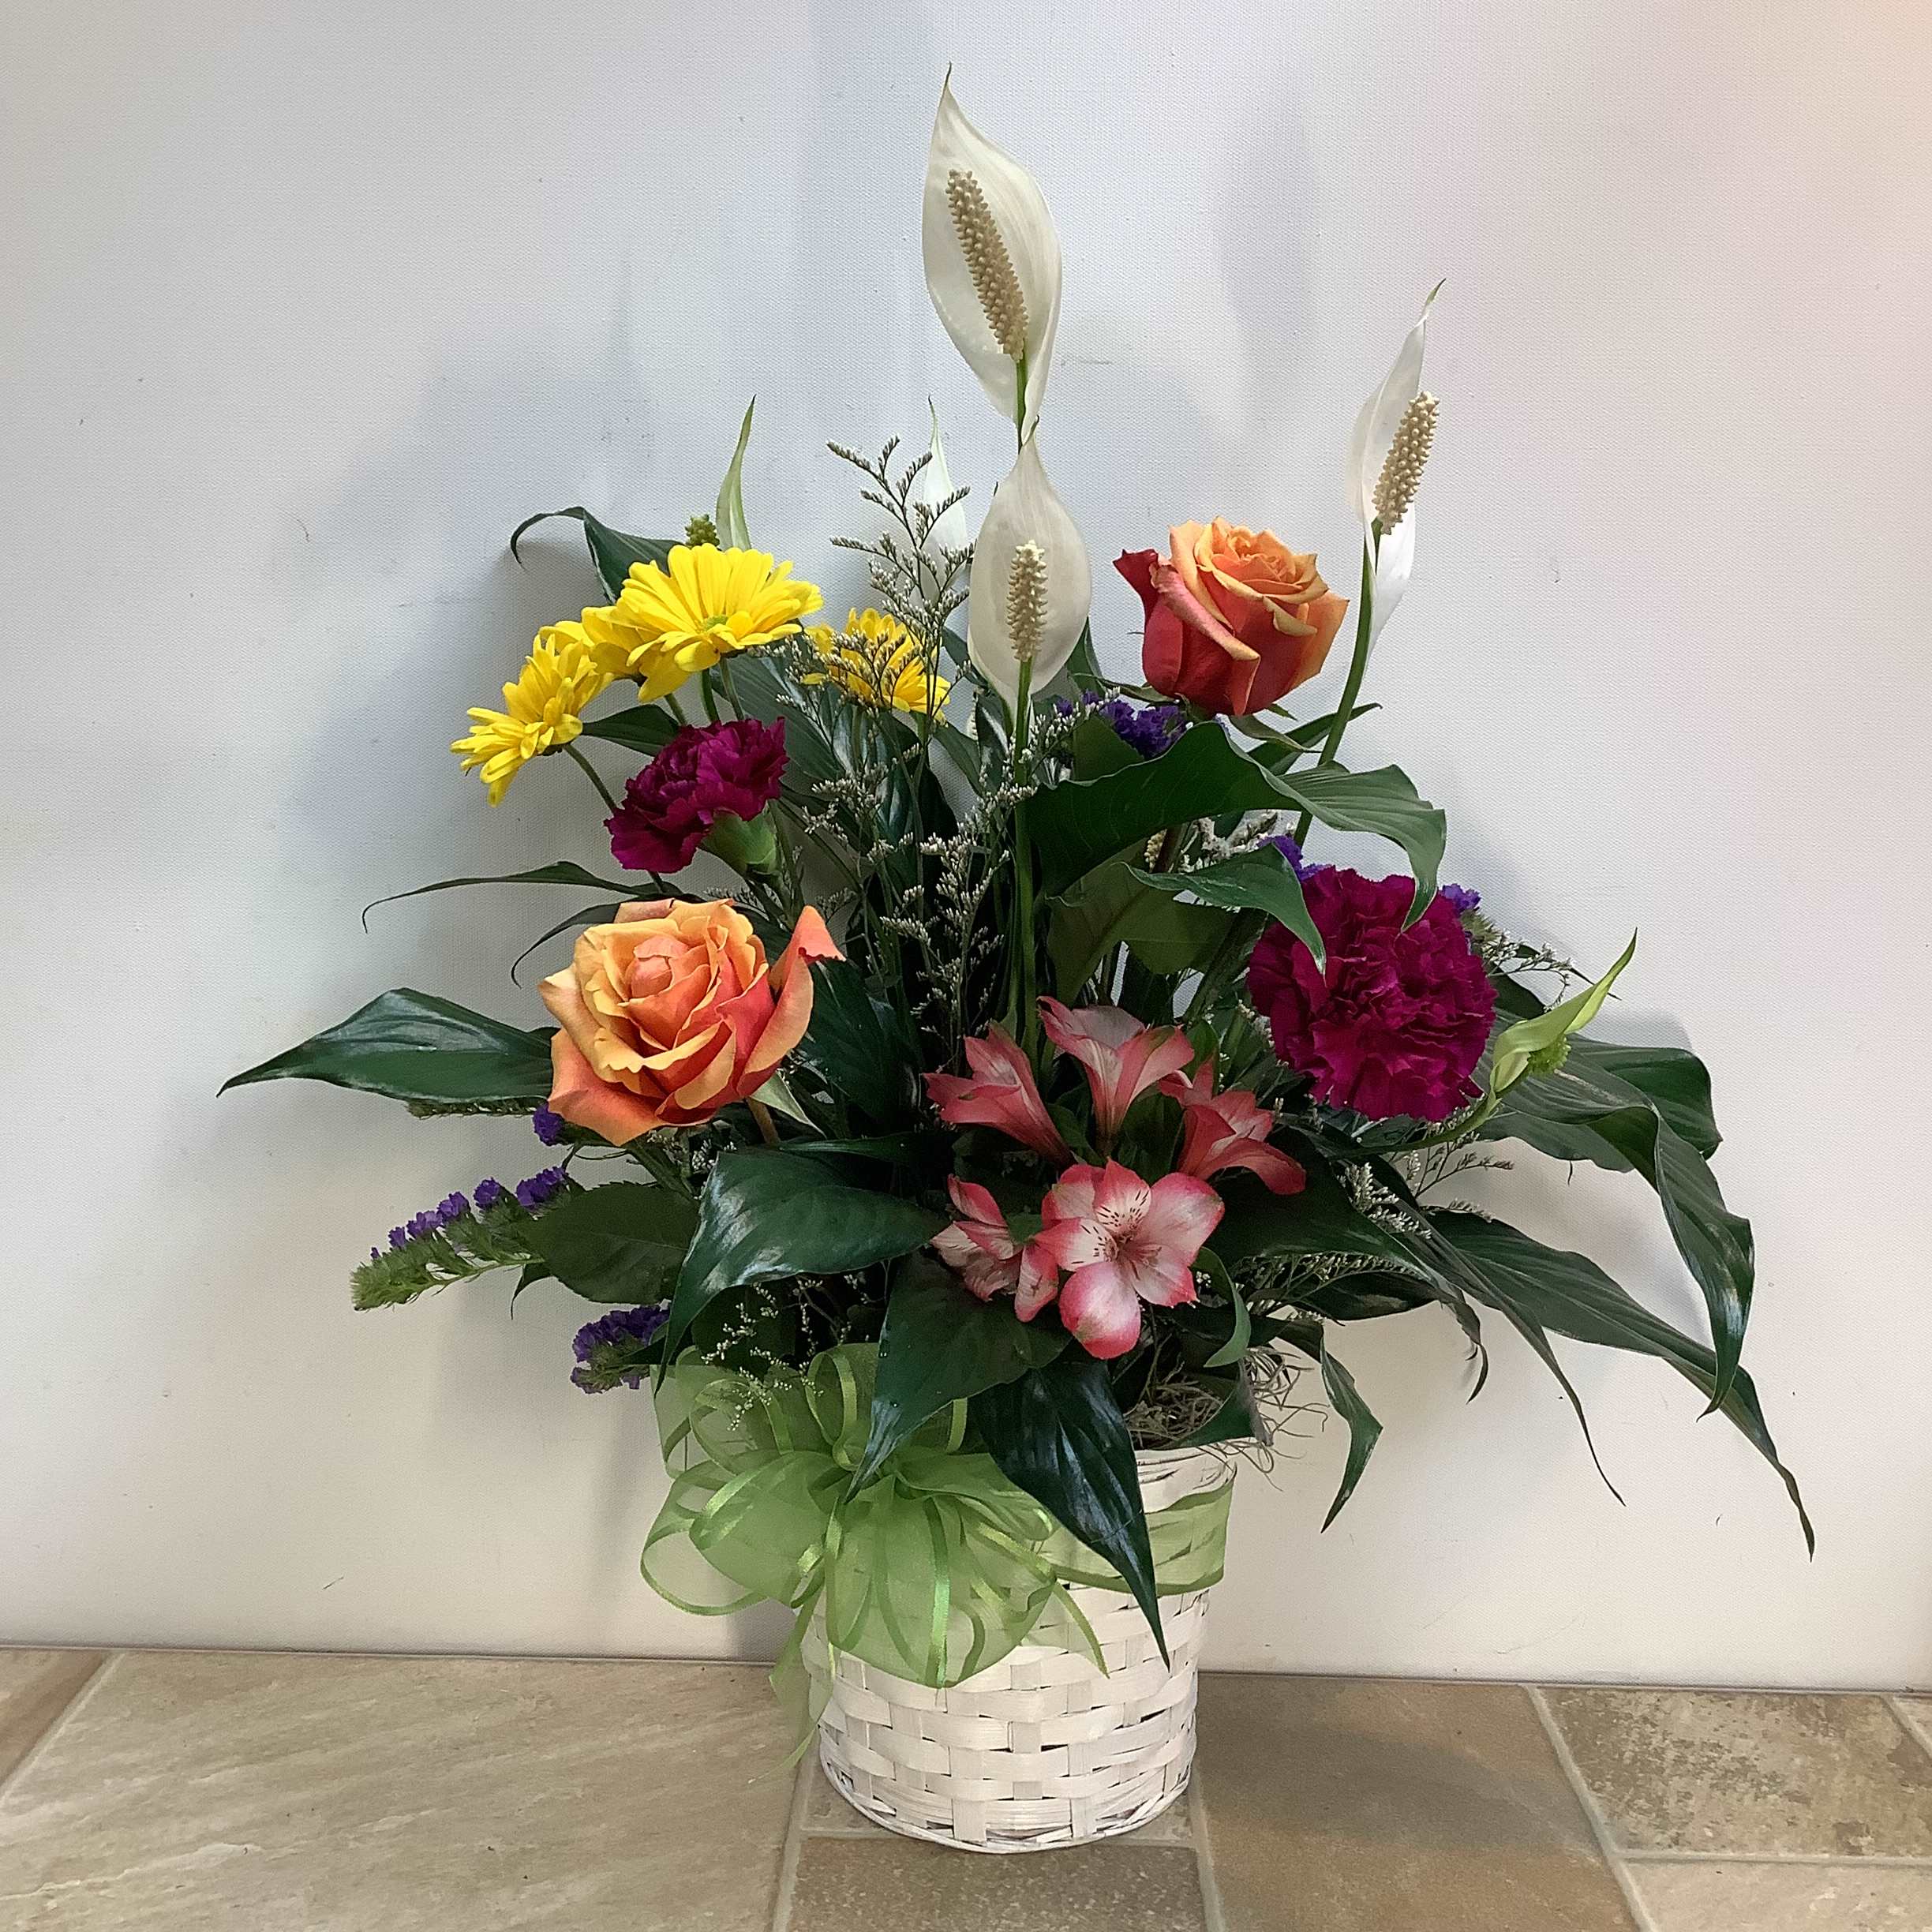 Peace Lily with Fresh Flowers - This beautiful arrangement features a live peace lily plant in a white wicker basket. We’ve enhanced it with a colorful variety of fresh flowers including roses, alstroemeria, carnations and daisies. It measures 19” wide x 24” tall. 